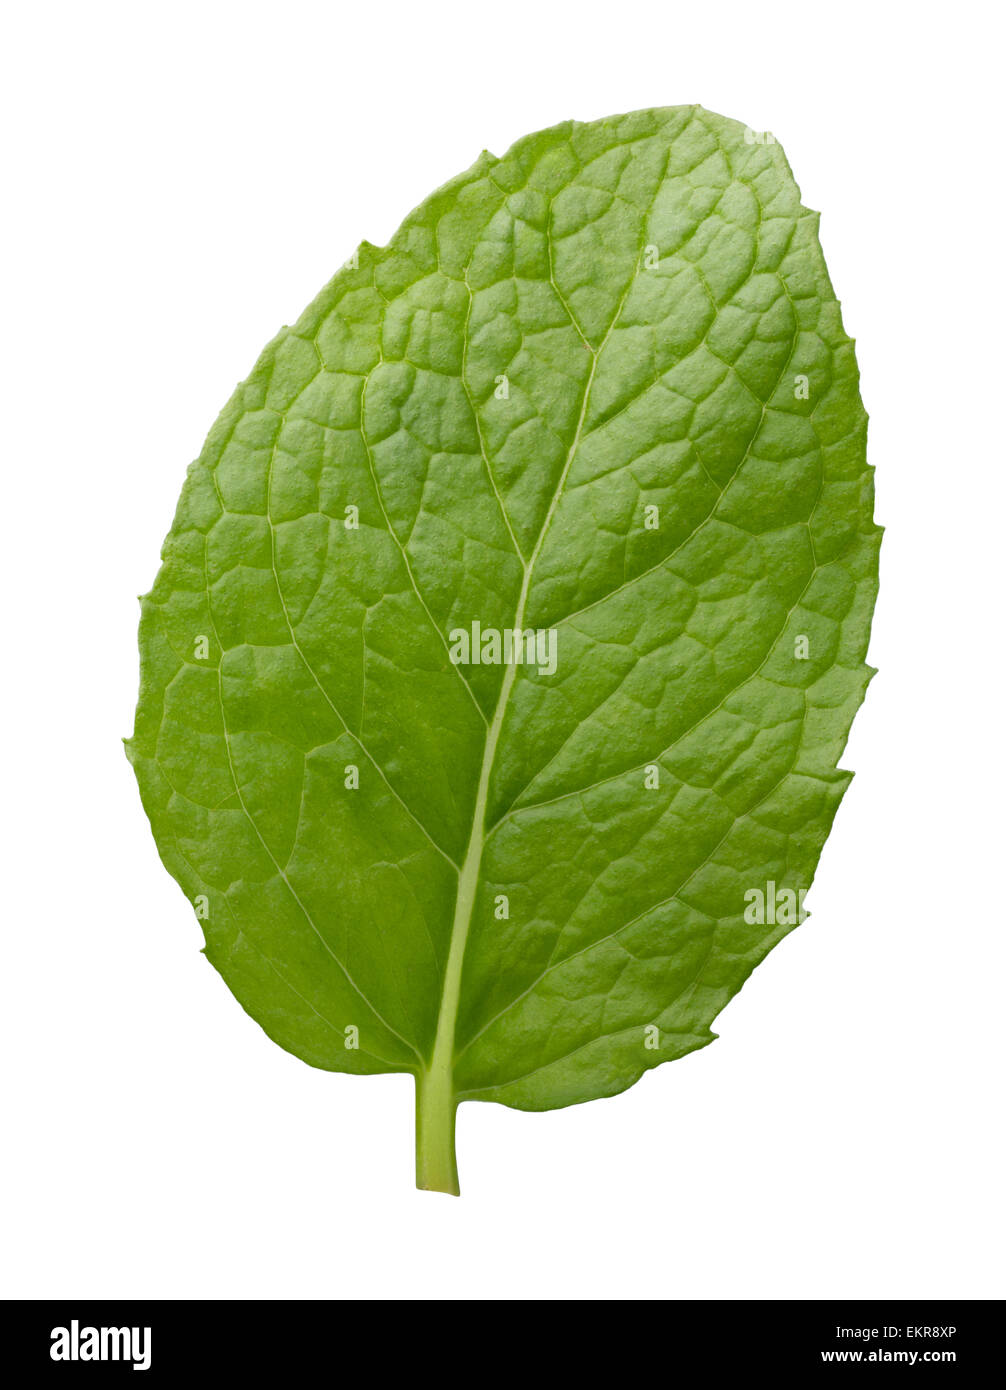 Single Fresh Mint Leaf. The image is a cut out, isolated on a white background. Stock Photo